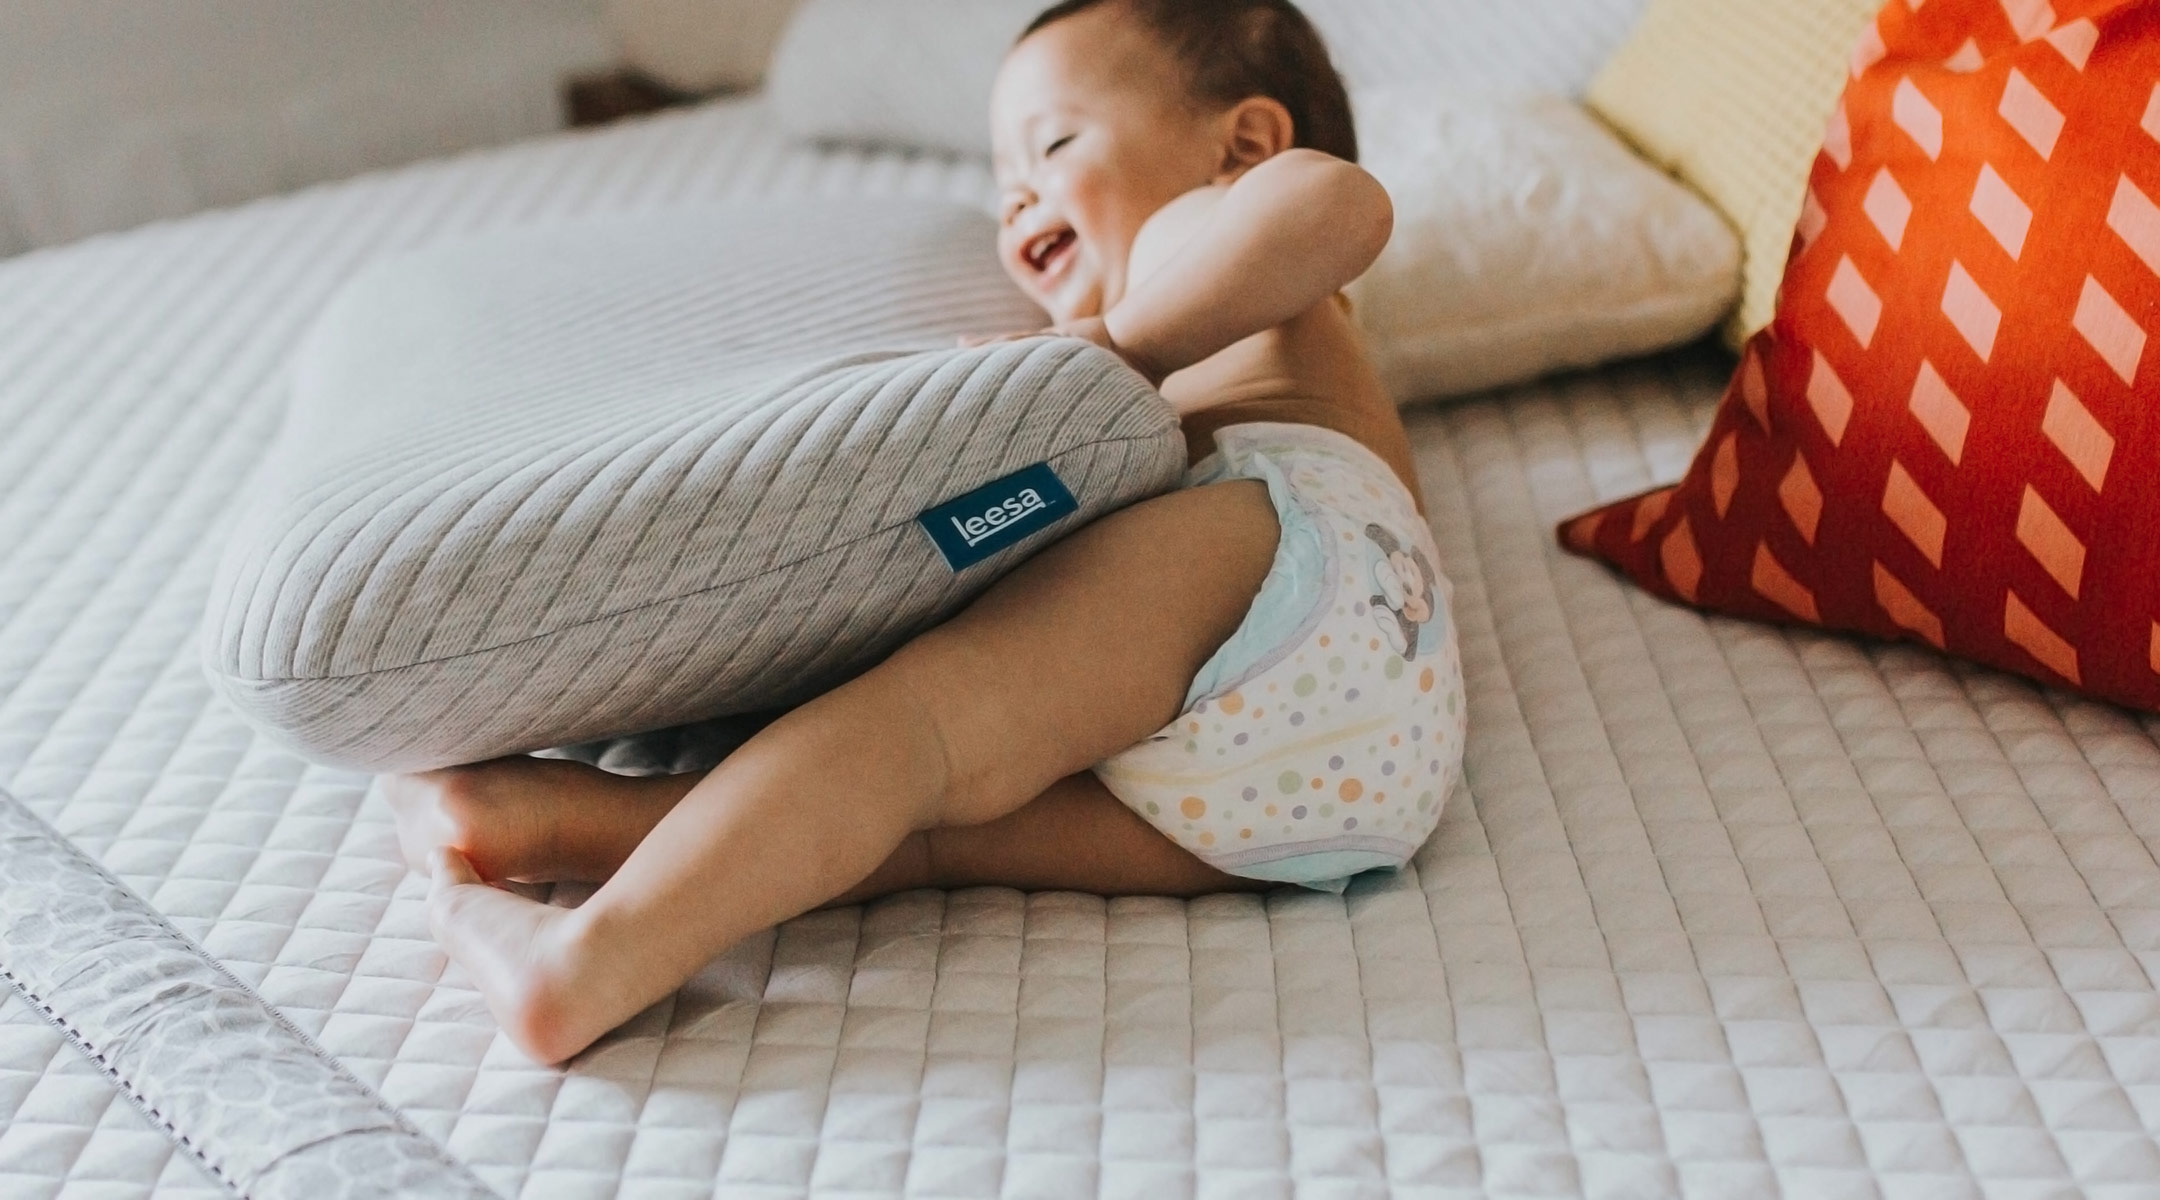 laughing baby wearing a diaper and playing on bed